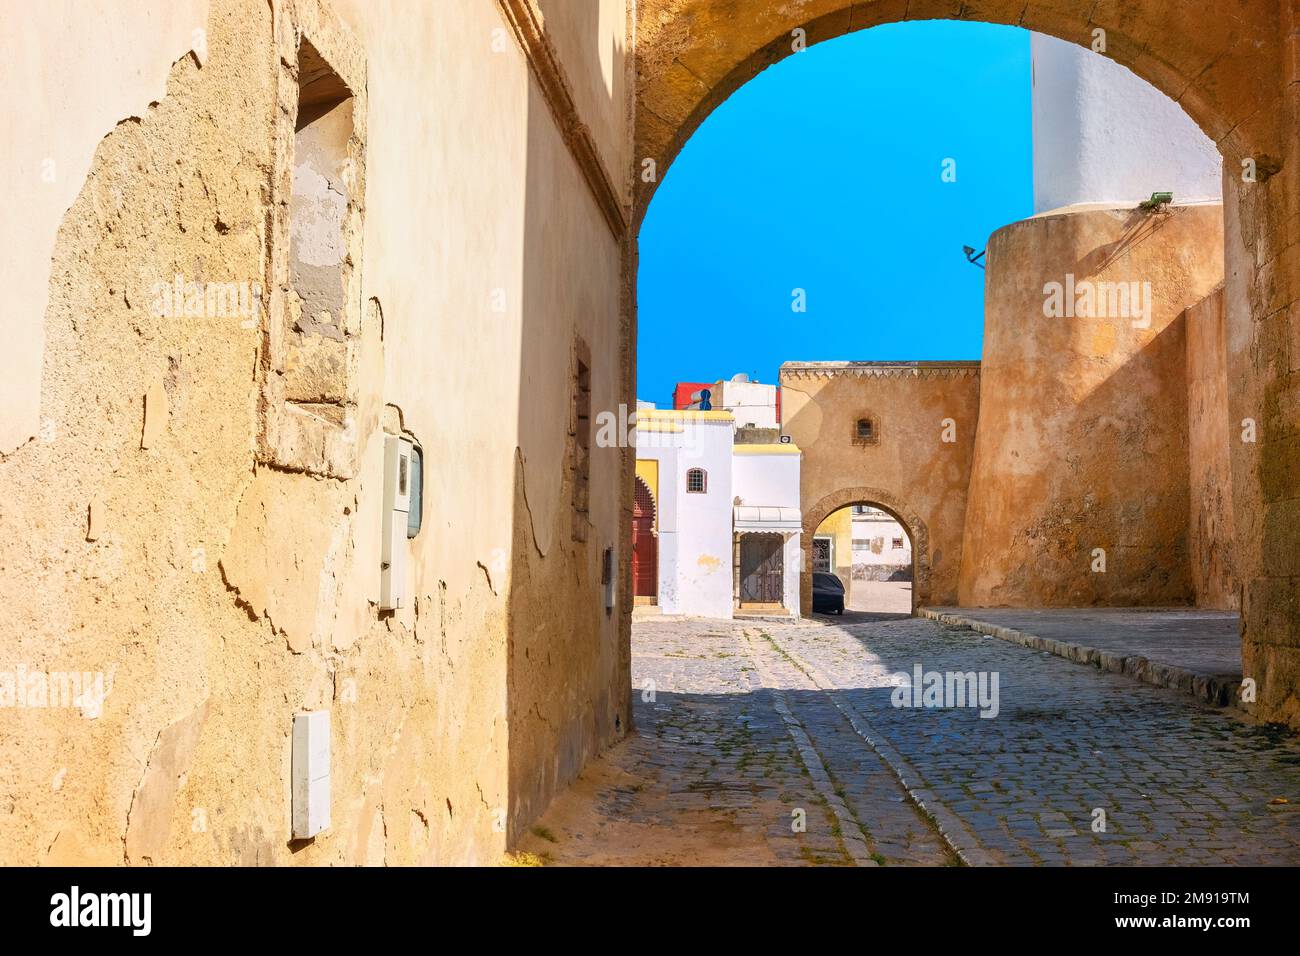 Street scene with traditional architecture in Medina of Essaouira town. Morocco, North Africa Stock Photo